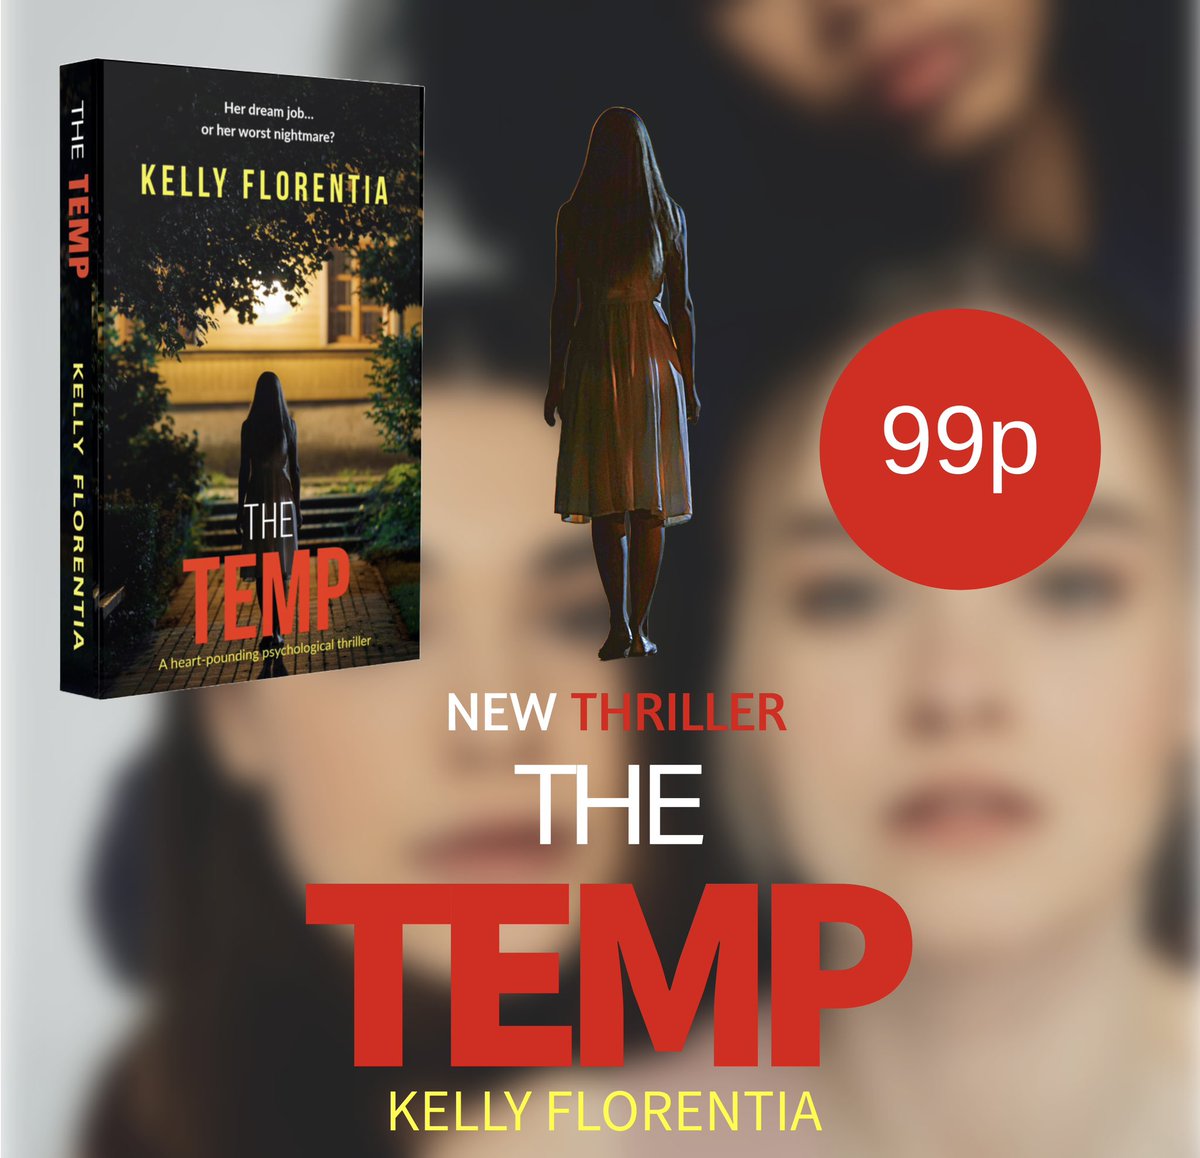 It all started to fall apart when I decided to keep a little secret from my husband. But I’ve hired Daisy now. And everything will be fine…won’t it? THE TEMP amzn.to/3JP7Wk9 ✨99p New Thriller ✨ #PsychologicalThriller #thrillerbooks #thursdayvibes